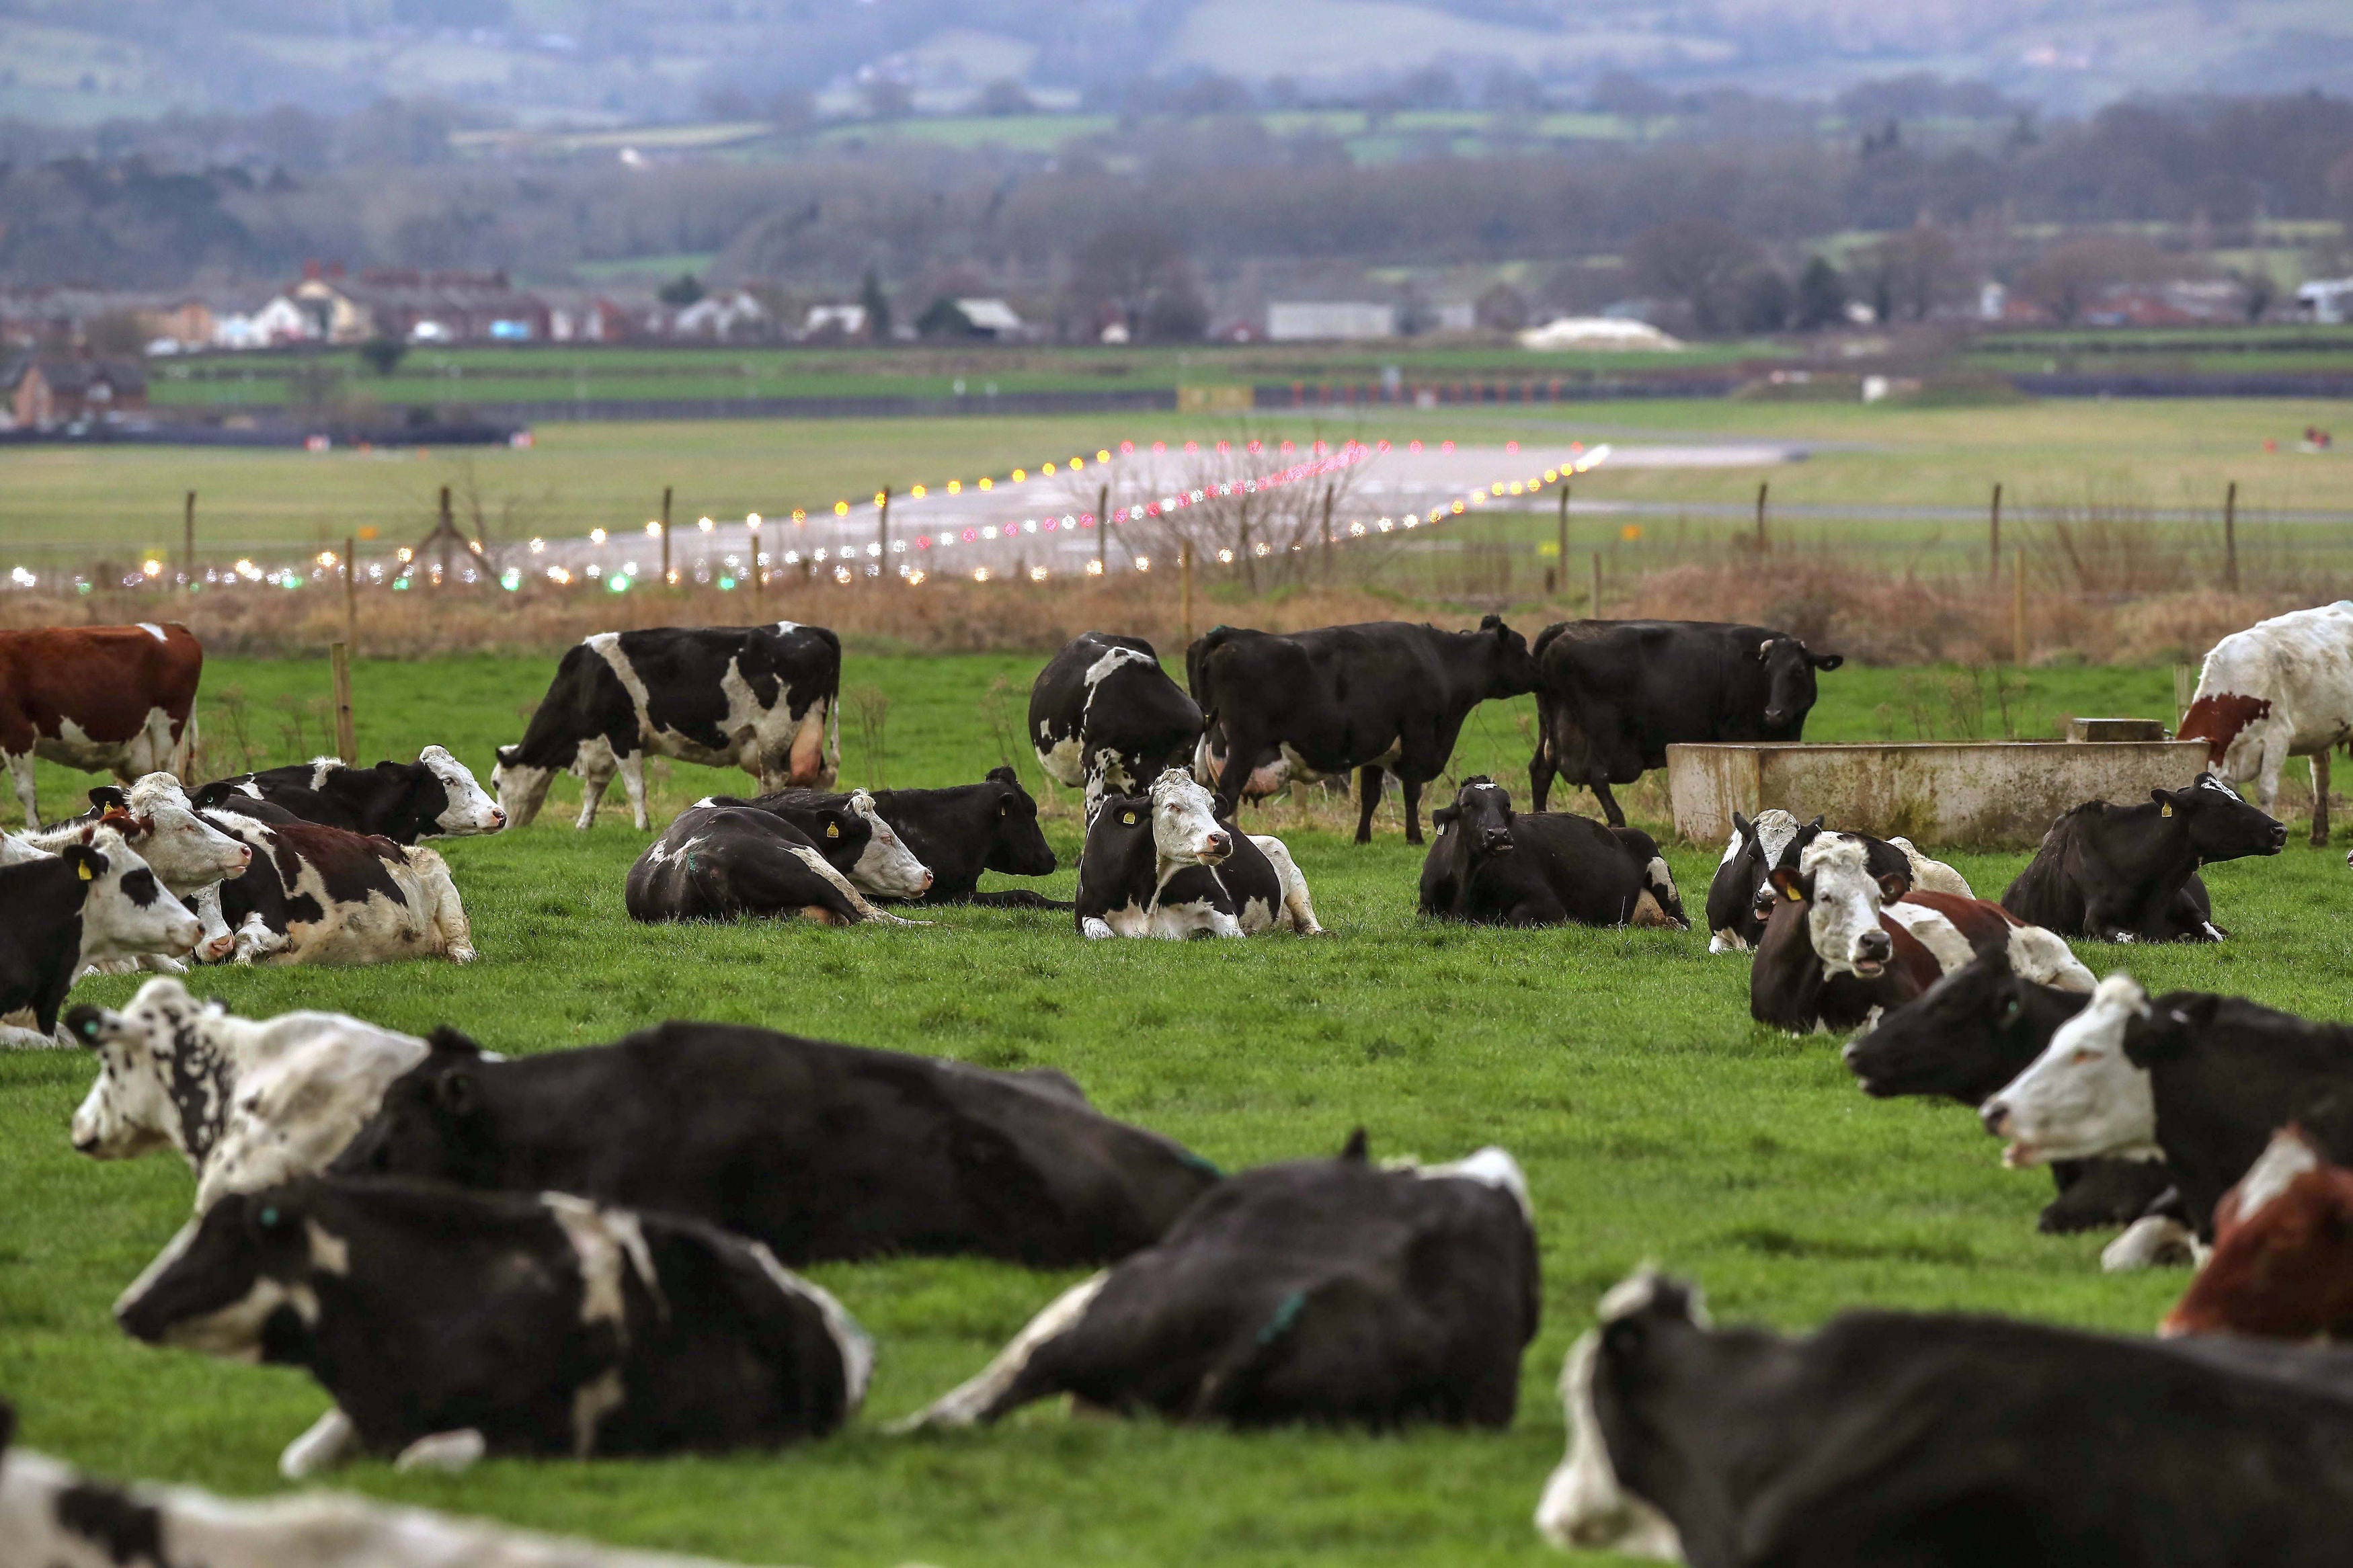 The number of cattle could be ‘sizeably’ reduced, according to farmers (Peter Byrne/PA)